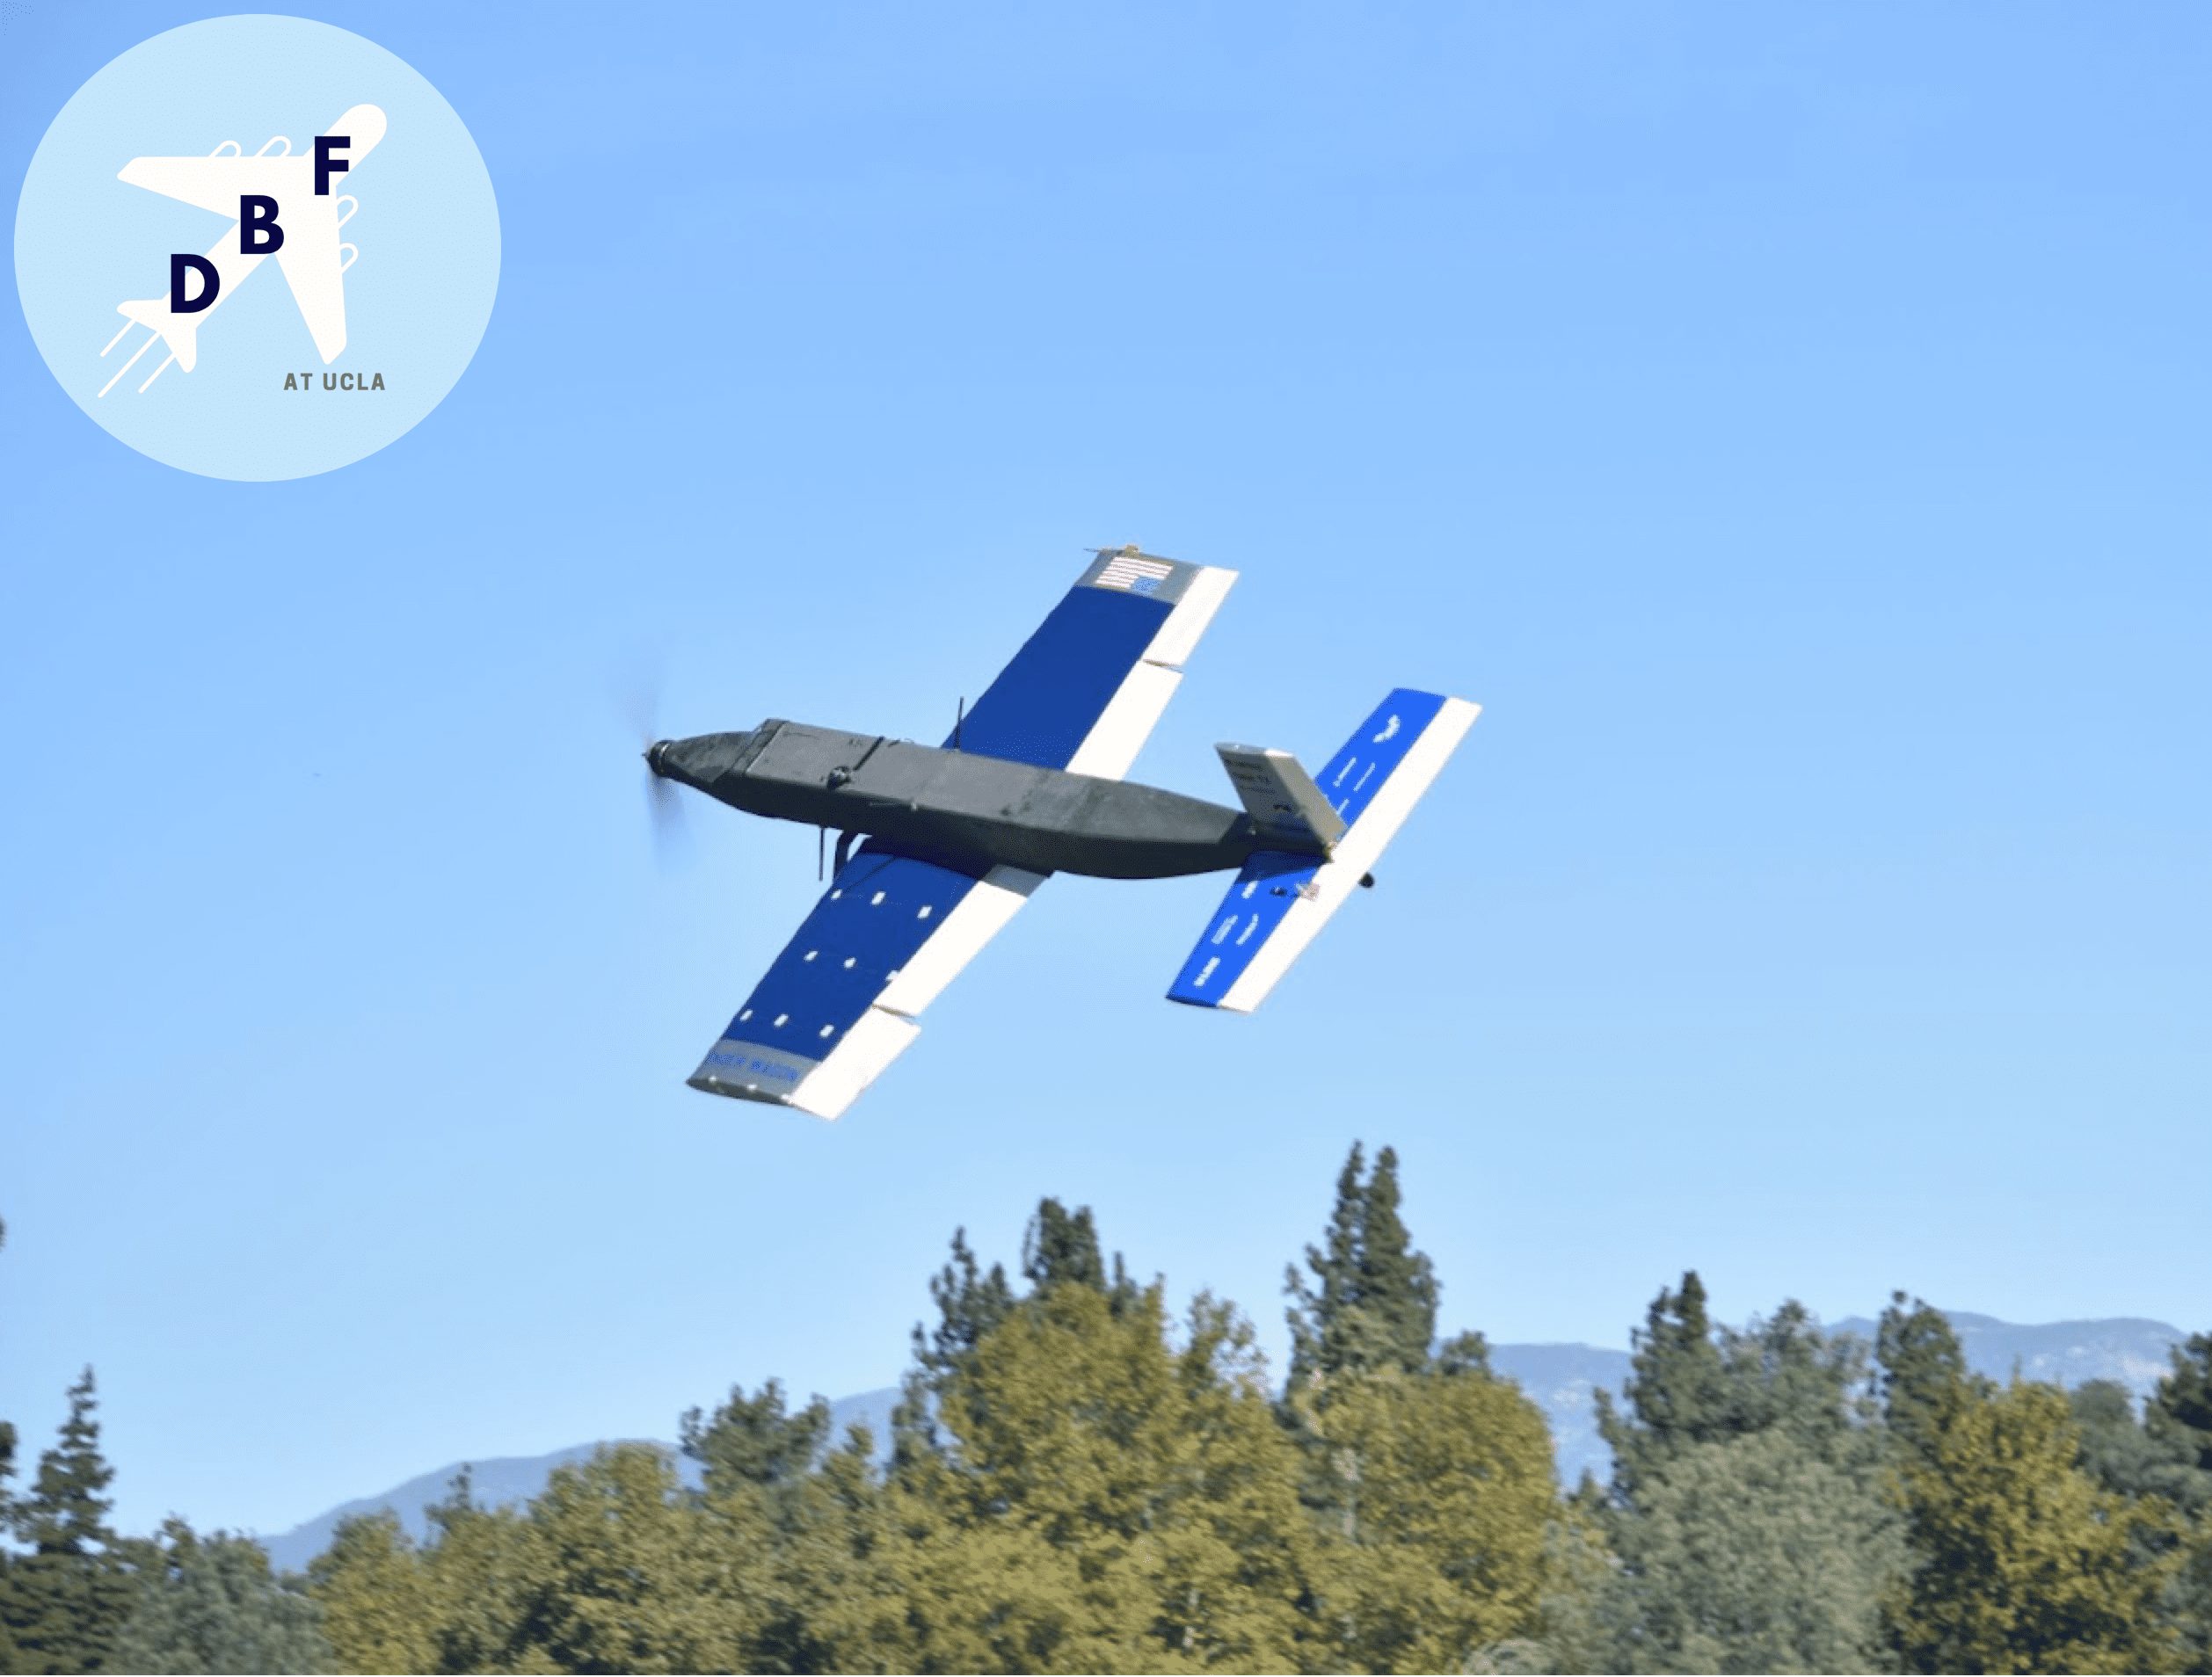 A blue and gray aircraft prototype in flight (developed by DBF at UCLA)